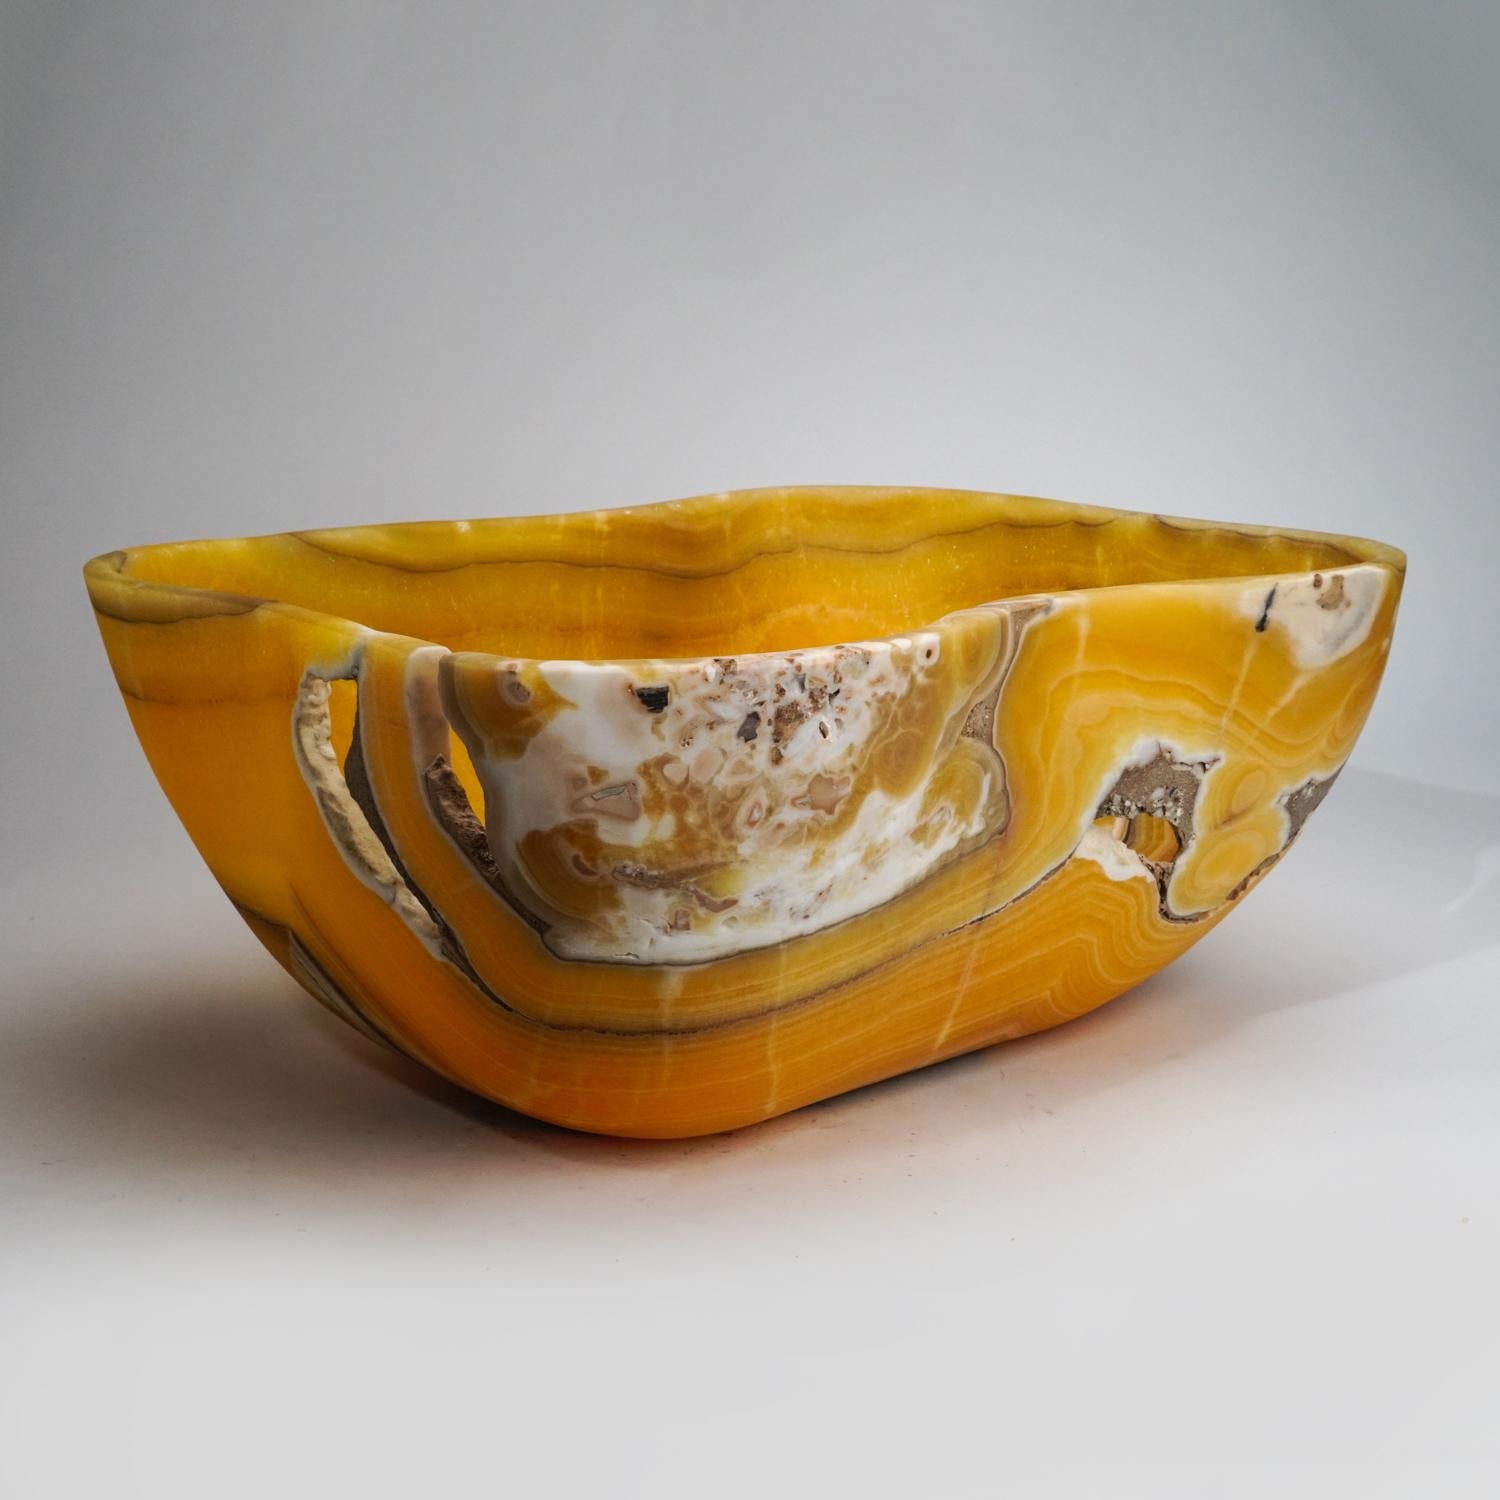 Large, one-of-a-kind, free-form natural onyx decorative bowl carved out of a single chunk of banded natural onyx. This incredible piece is polished to a mirror finish. This unique piece blends natural onyx shades of orange, white, honey and blue